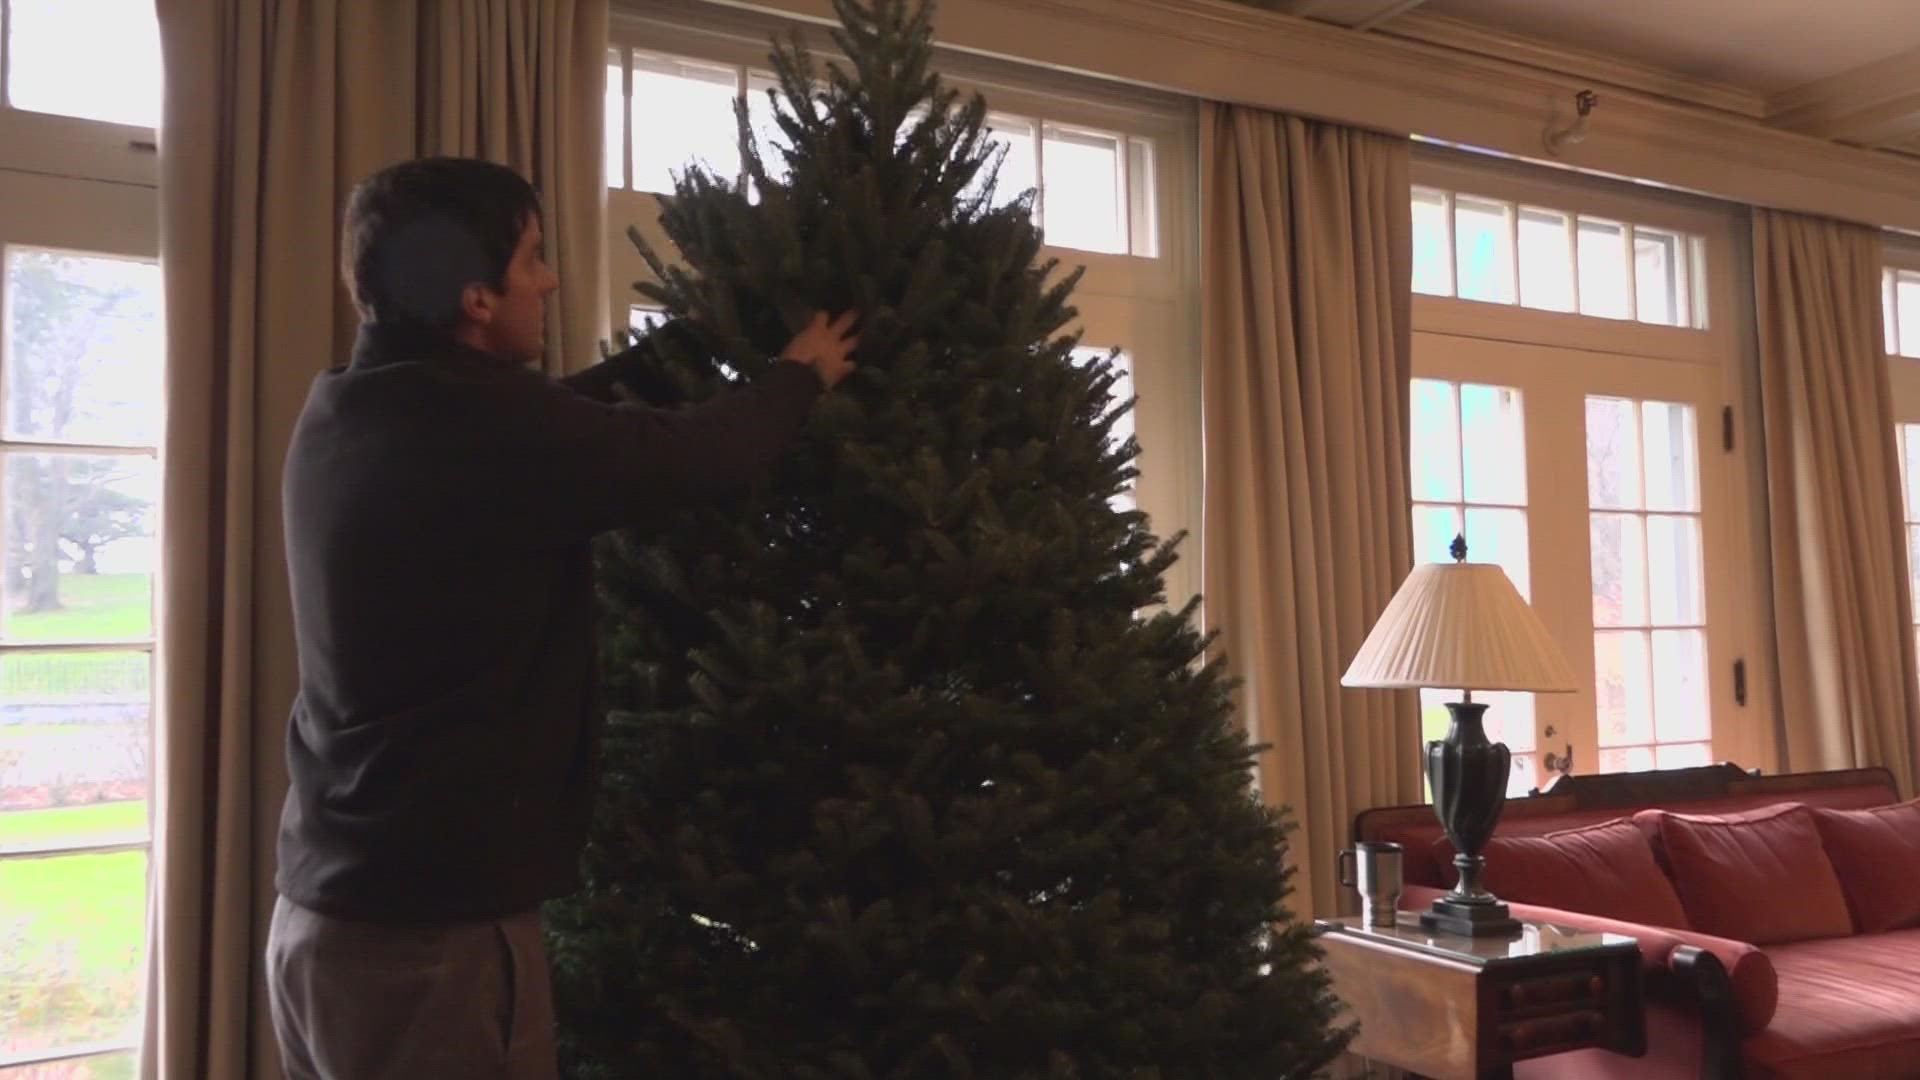 Three award-winning Christmas trees are being displayed at the Blaine House this holiday season.